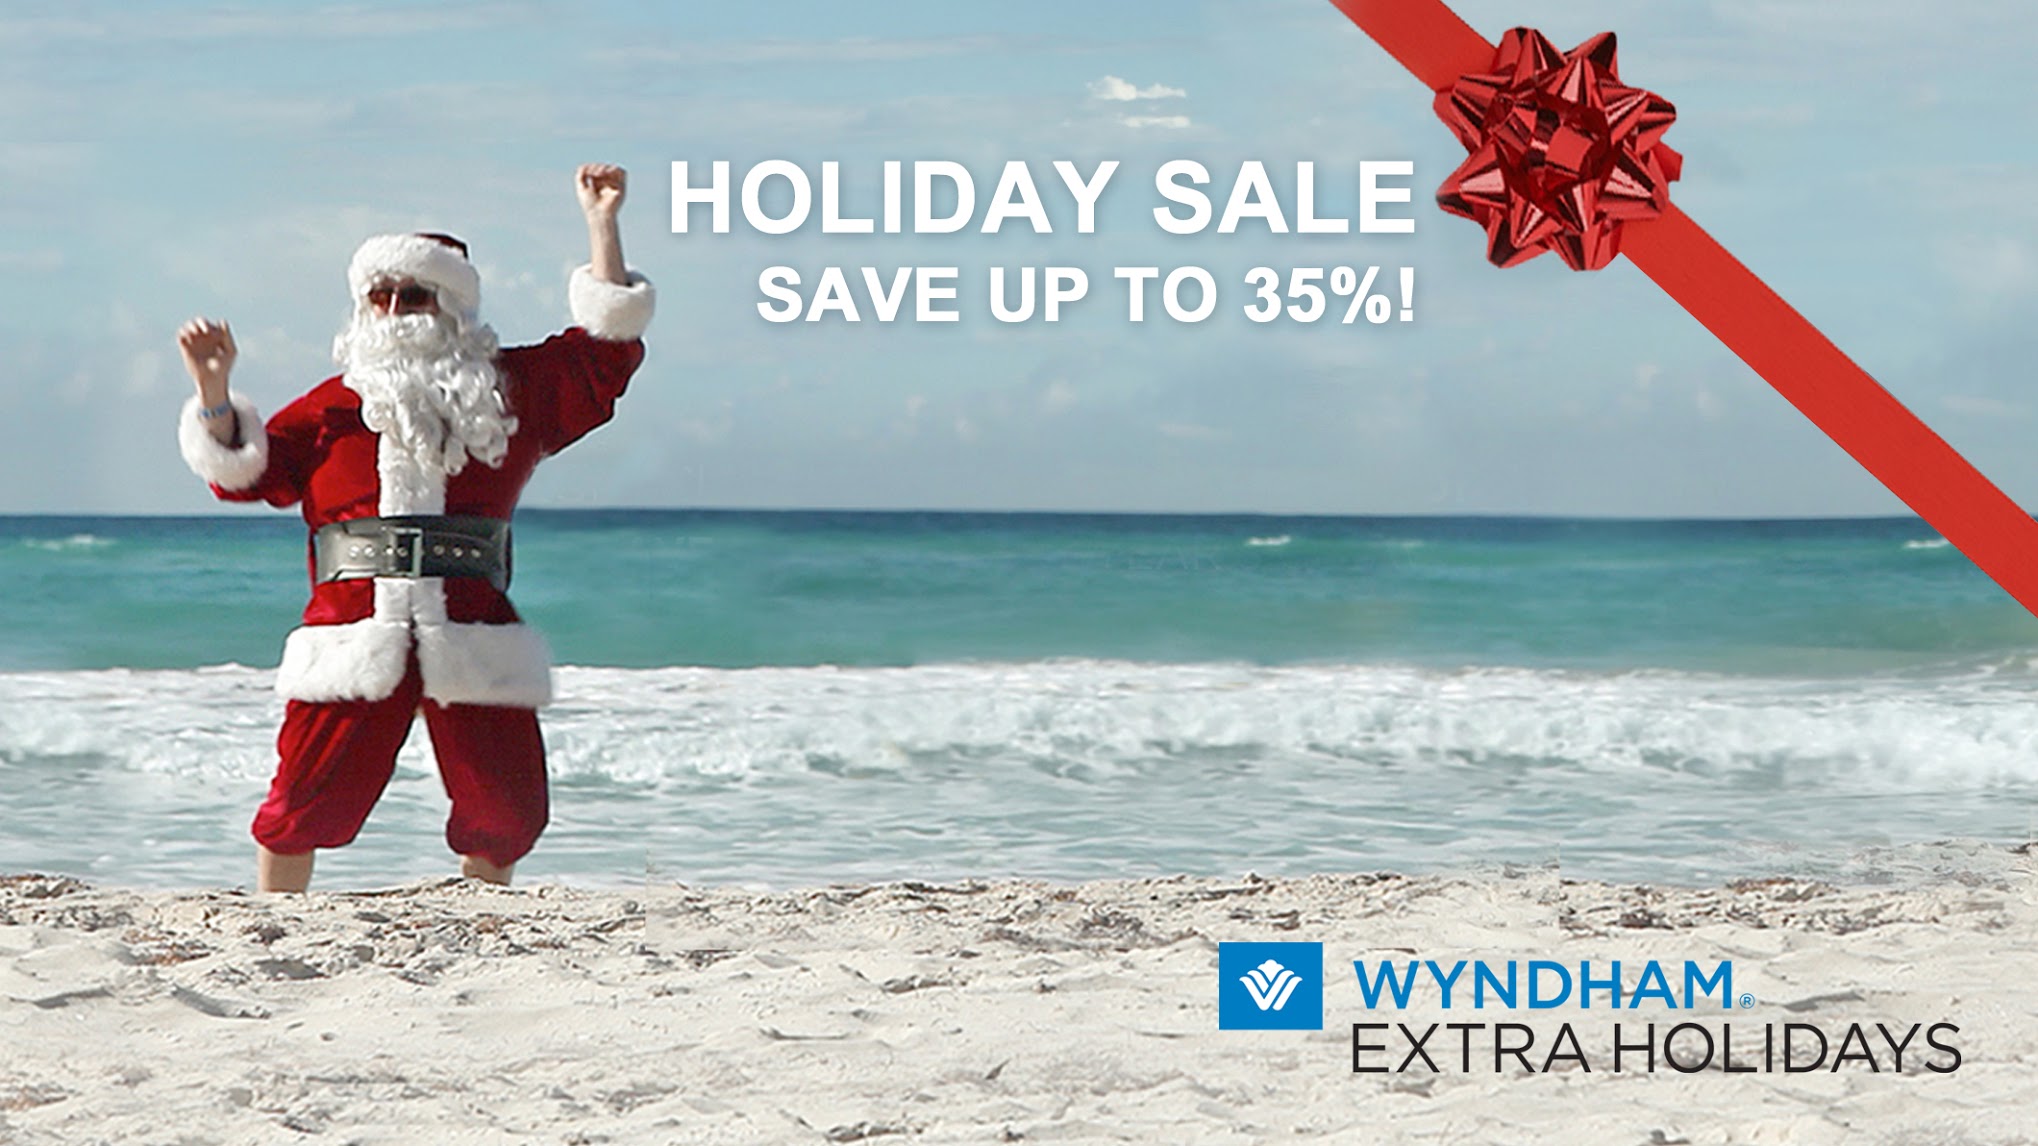 Give The Perfect Holiday Gift With Wyndham Extra Holidays